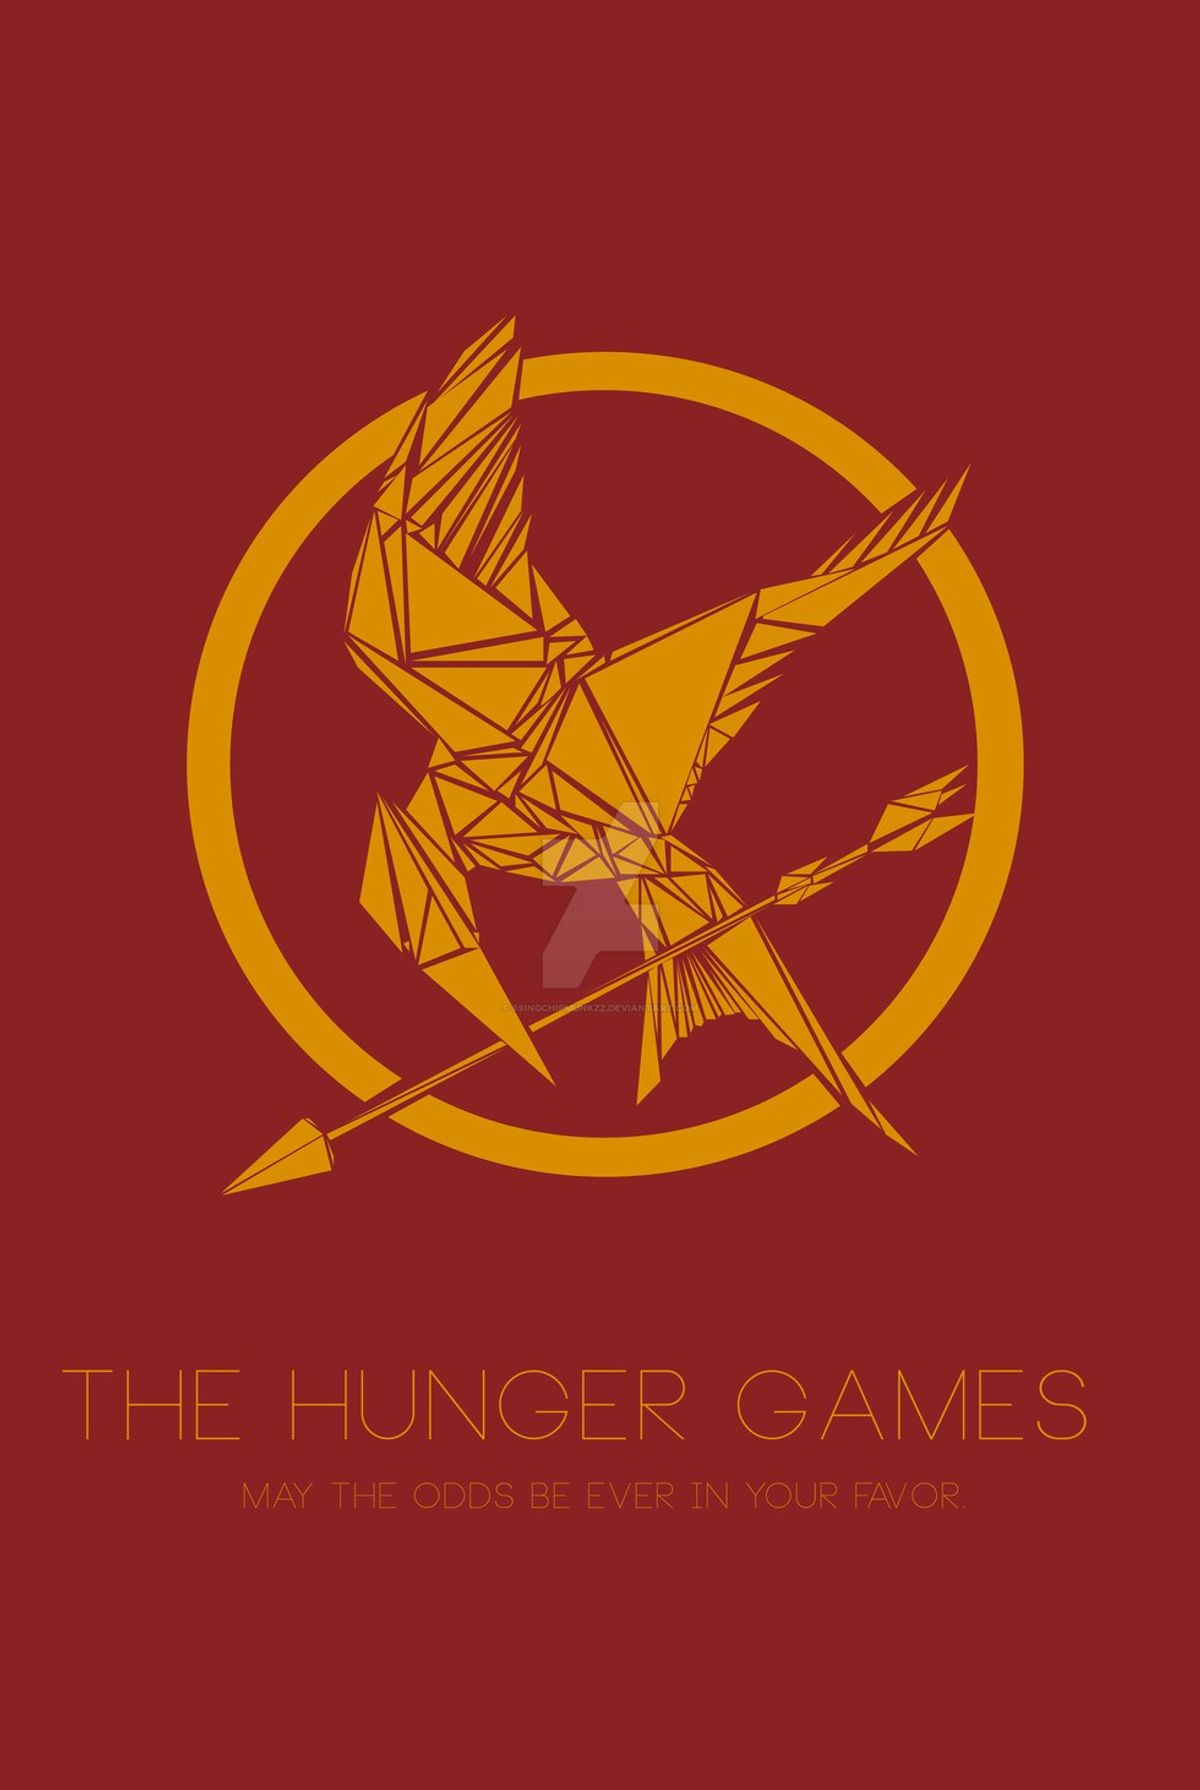 What The Hunger Games Taught Me About Faith